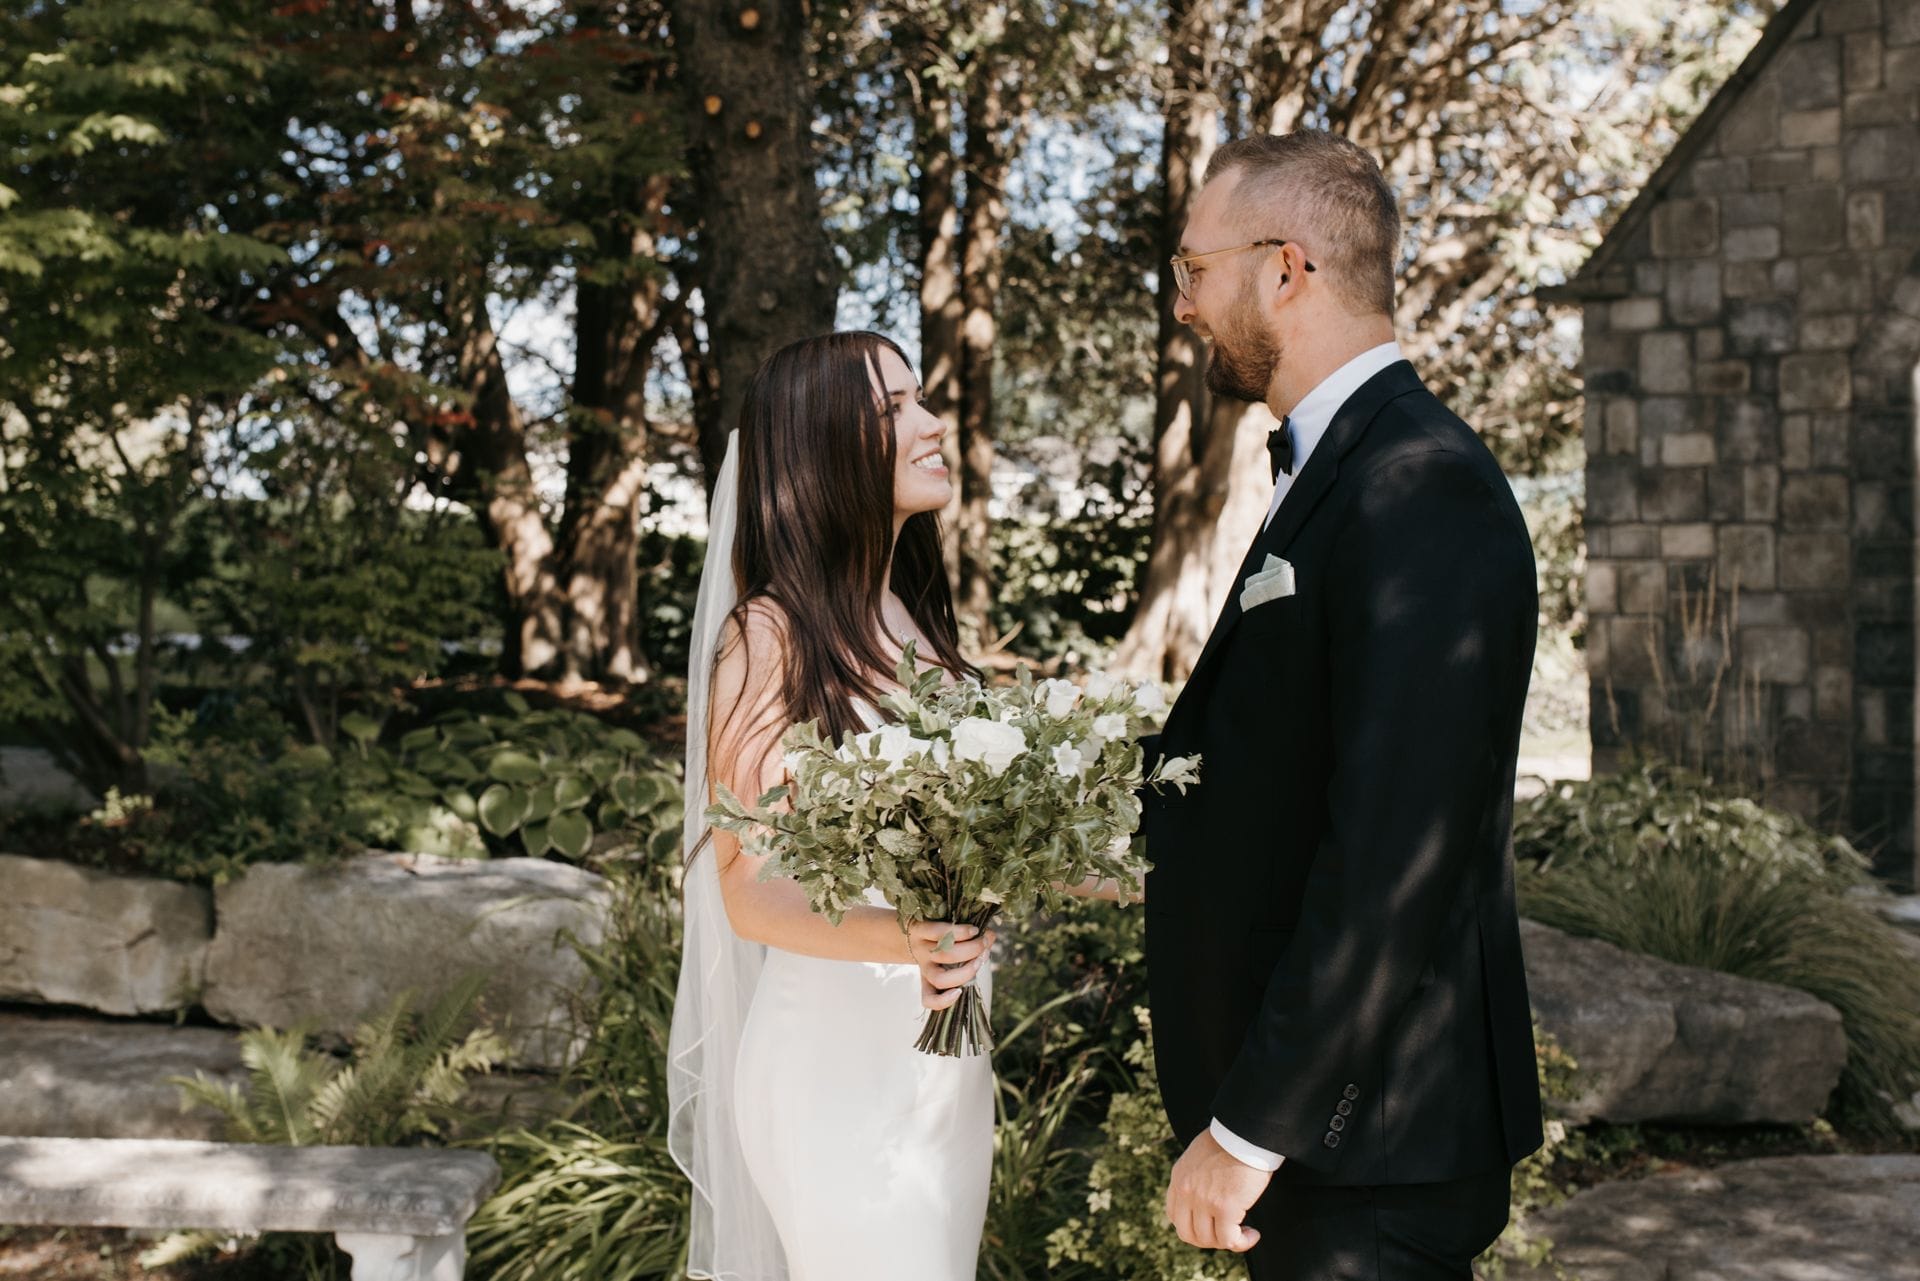 An Intimate Afternoon Wedding in Ashburn Ontario